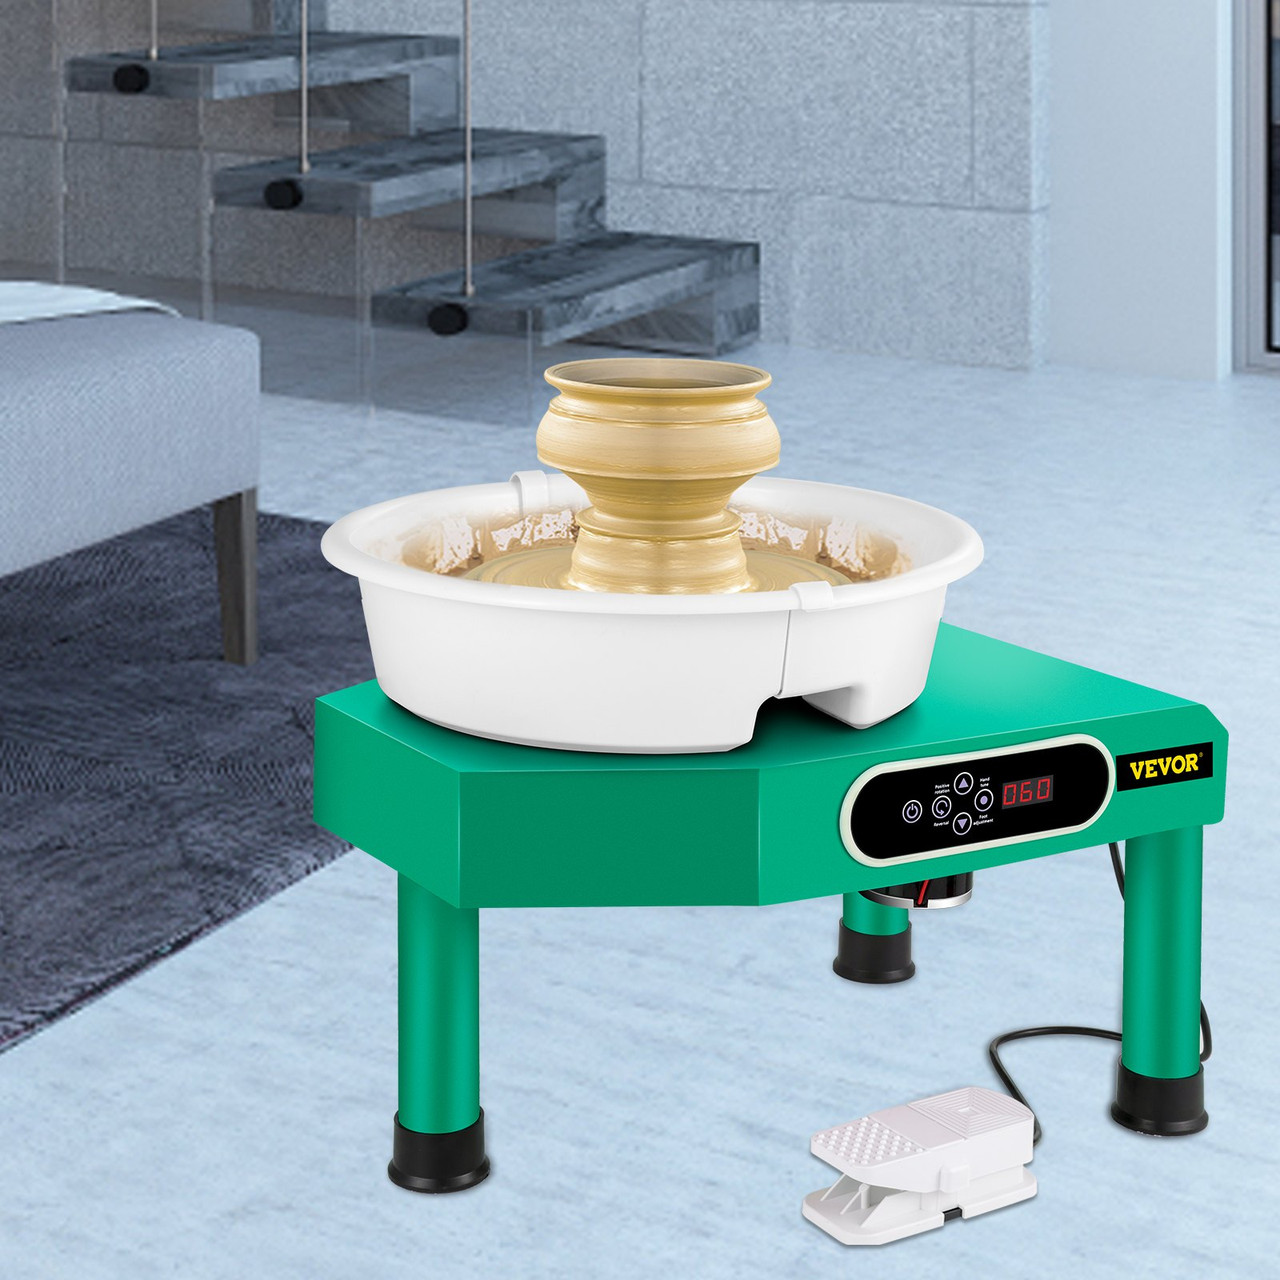 VEVOR Pottery Wheel 9.8" LCD Touch Screen Pottery Wheel Forming Machine,350W Electric DIY Clay Sculpting Tools with Foot Pedal & Detachable ABS Basin for Adults and Beginners Art Craft (Green)